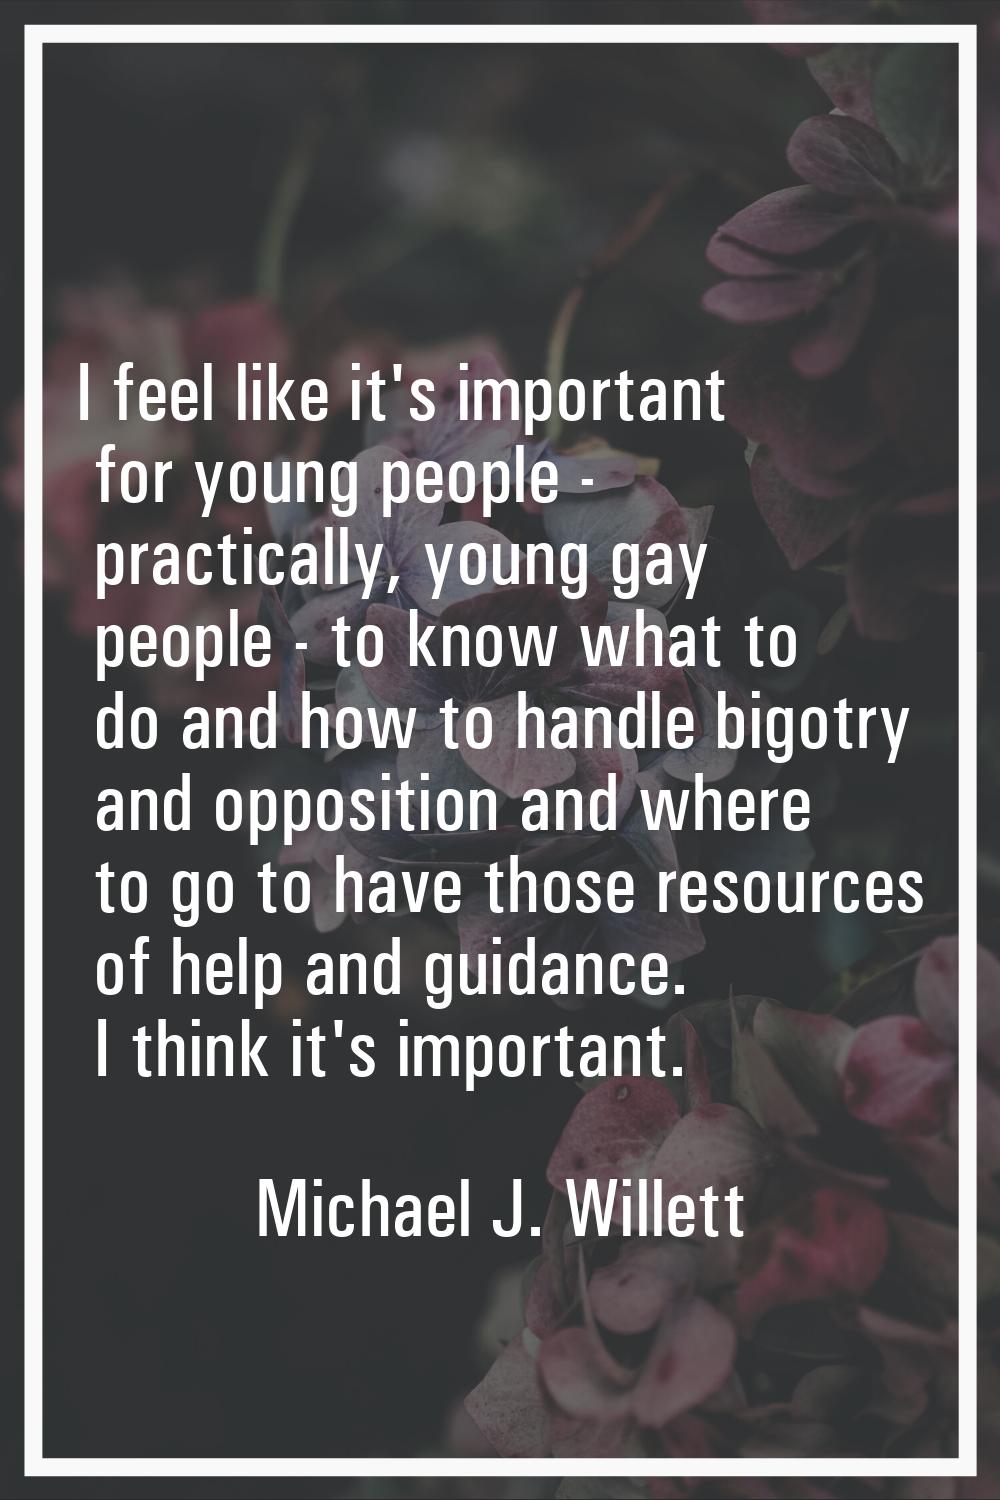 I feel like it's important for young people - practically, young gay people - to know what to do an